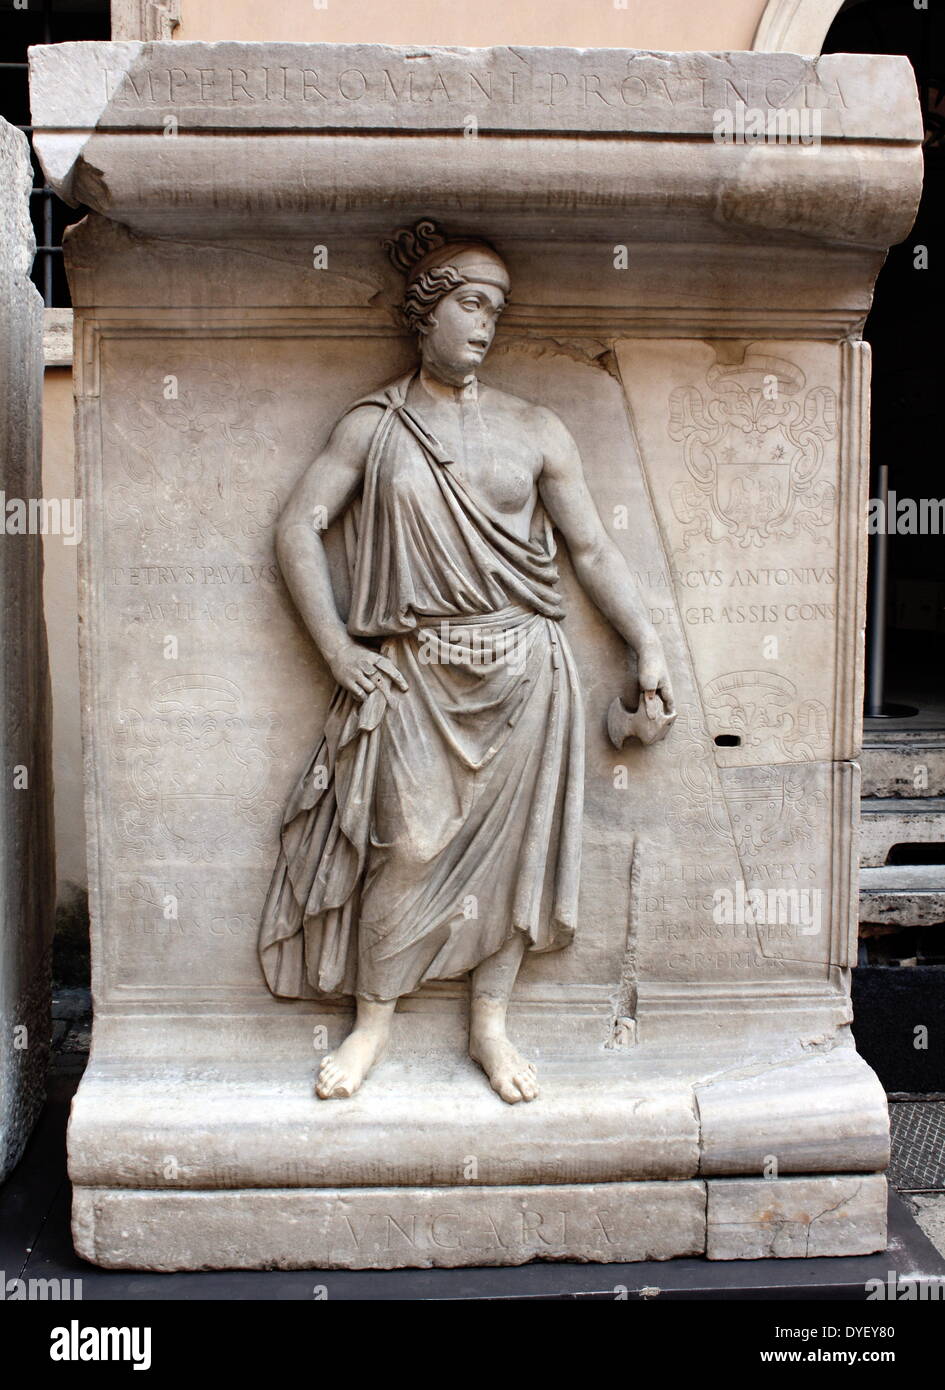 Sculptural relief detail from the entrance/courtyard to the Capitolini museums, in Rome, Italy. The museums themselves are contained within 3 palazzi as per designs by Michelangelo Buonarroti in 1536, they were then built over a 400 year period. Stock Photo